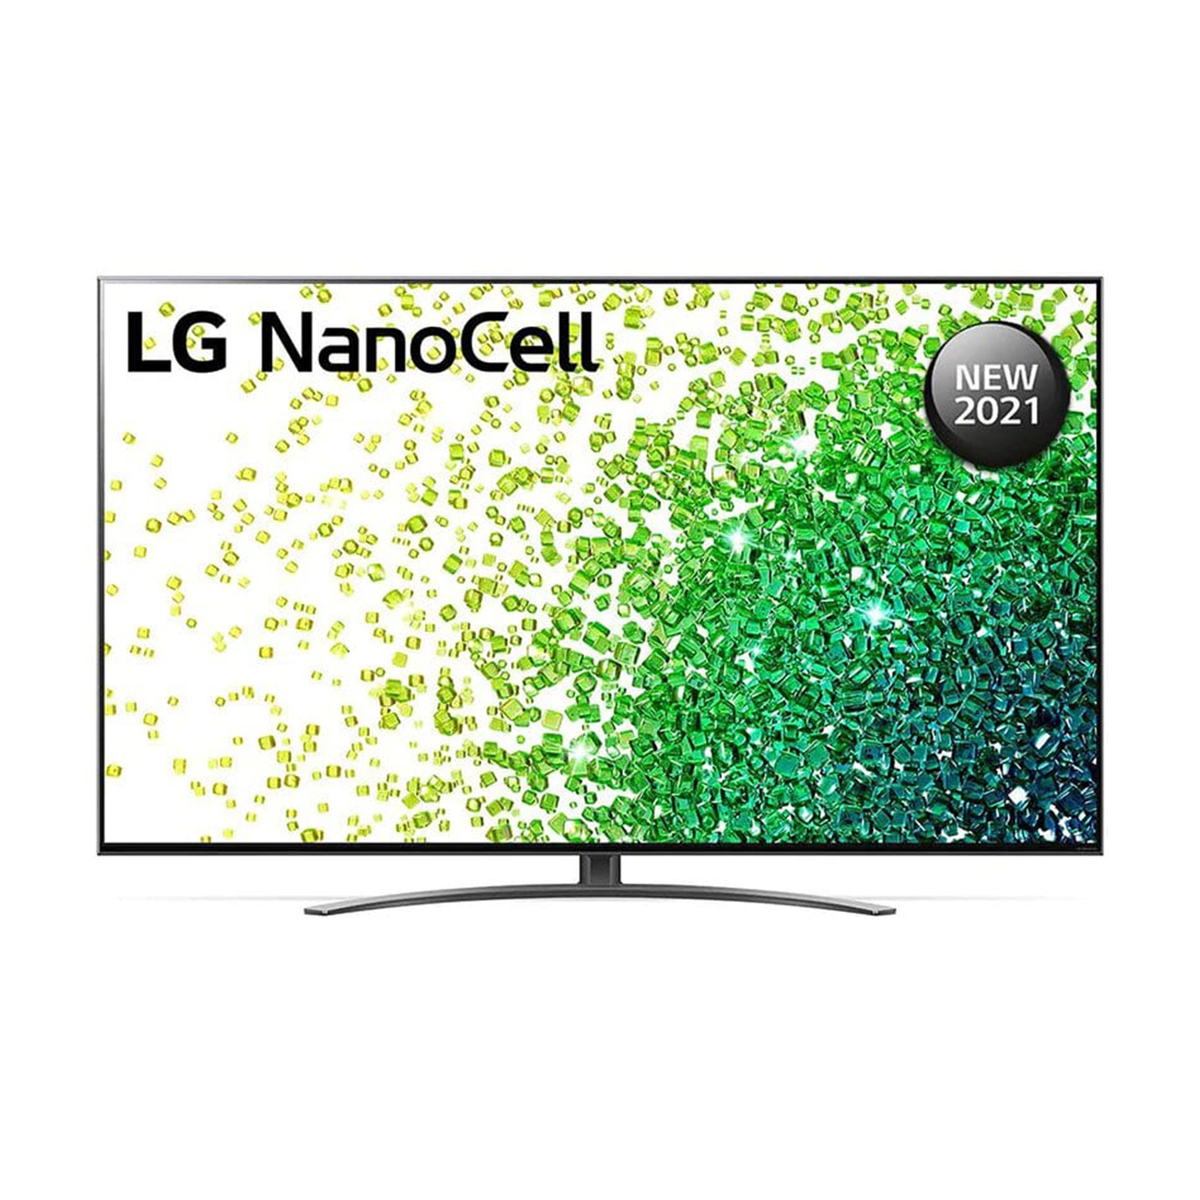 LG NanoCell 4K Smart TV 65 Inch NANO86 Series Cinema Screen Design, New 2021 4K Cinema HDR webOS Smart with ThinQ AI Local Dimming